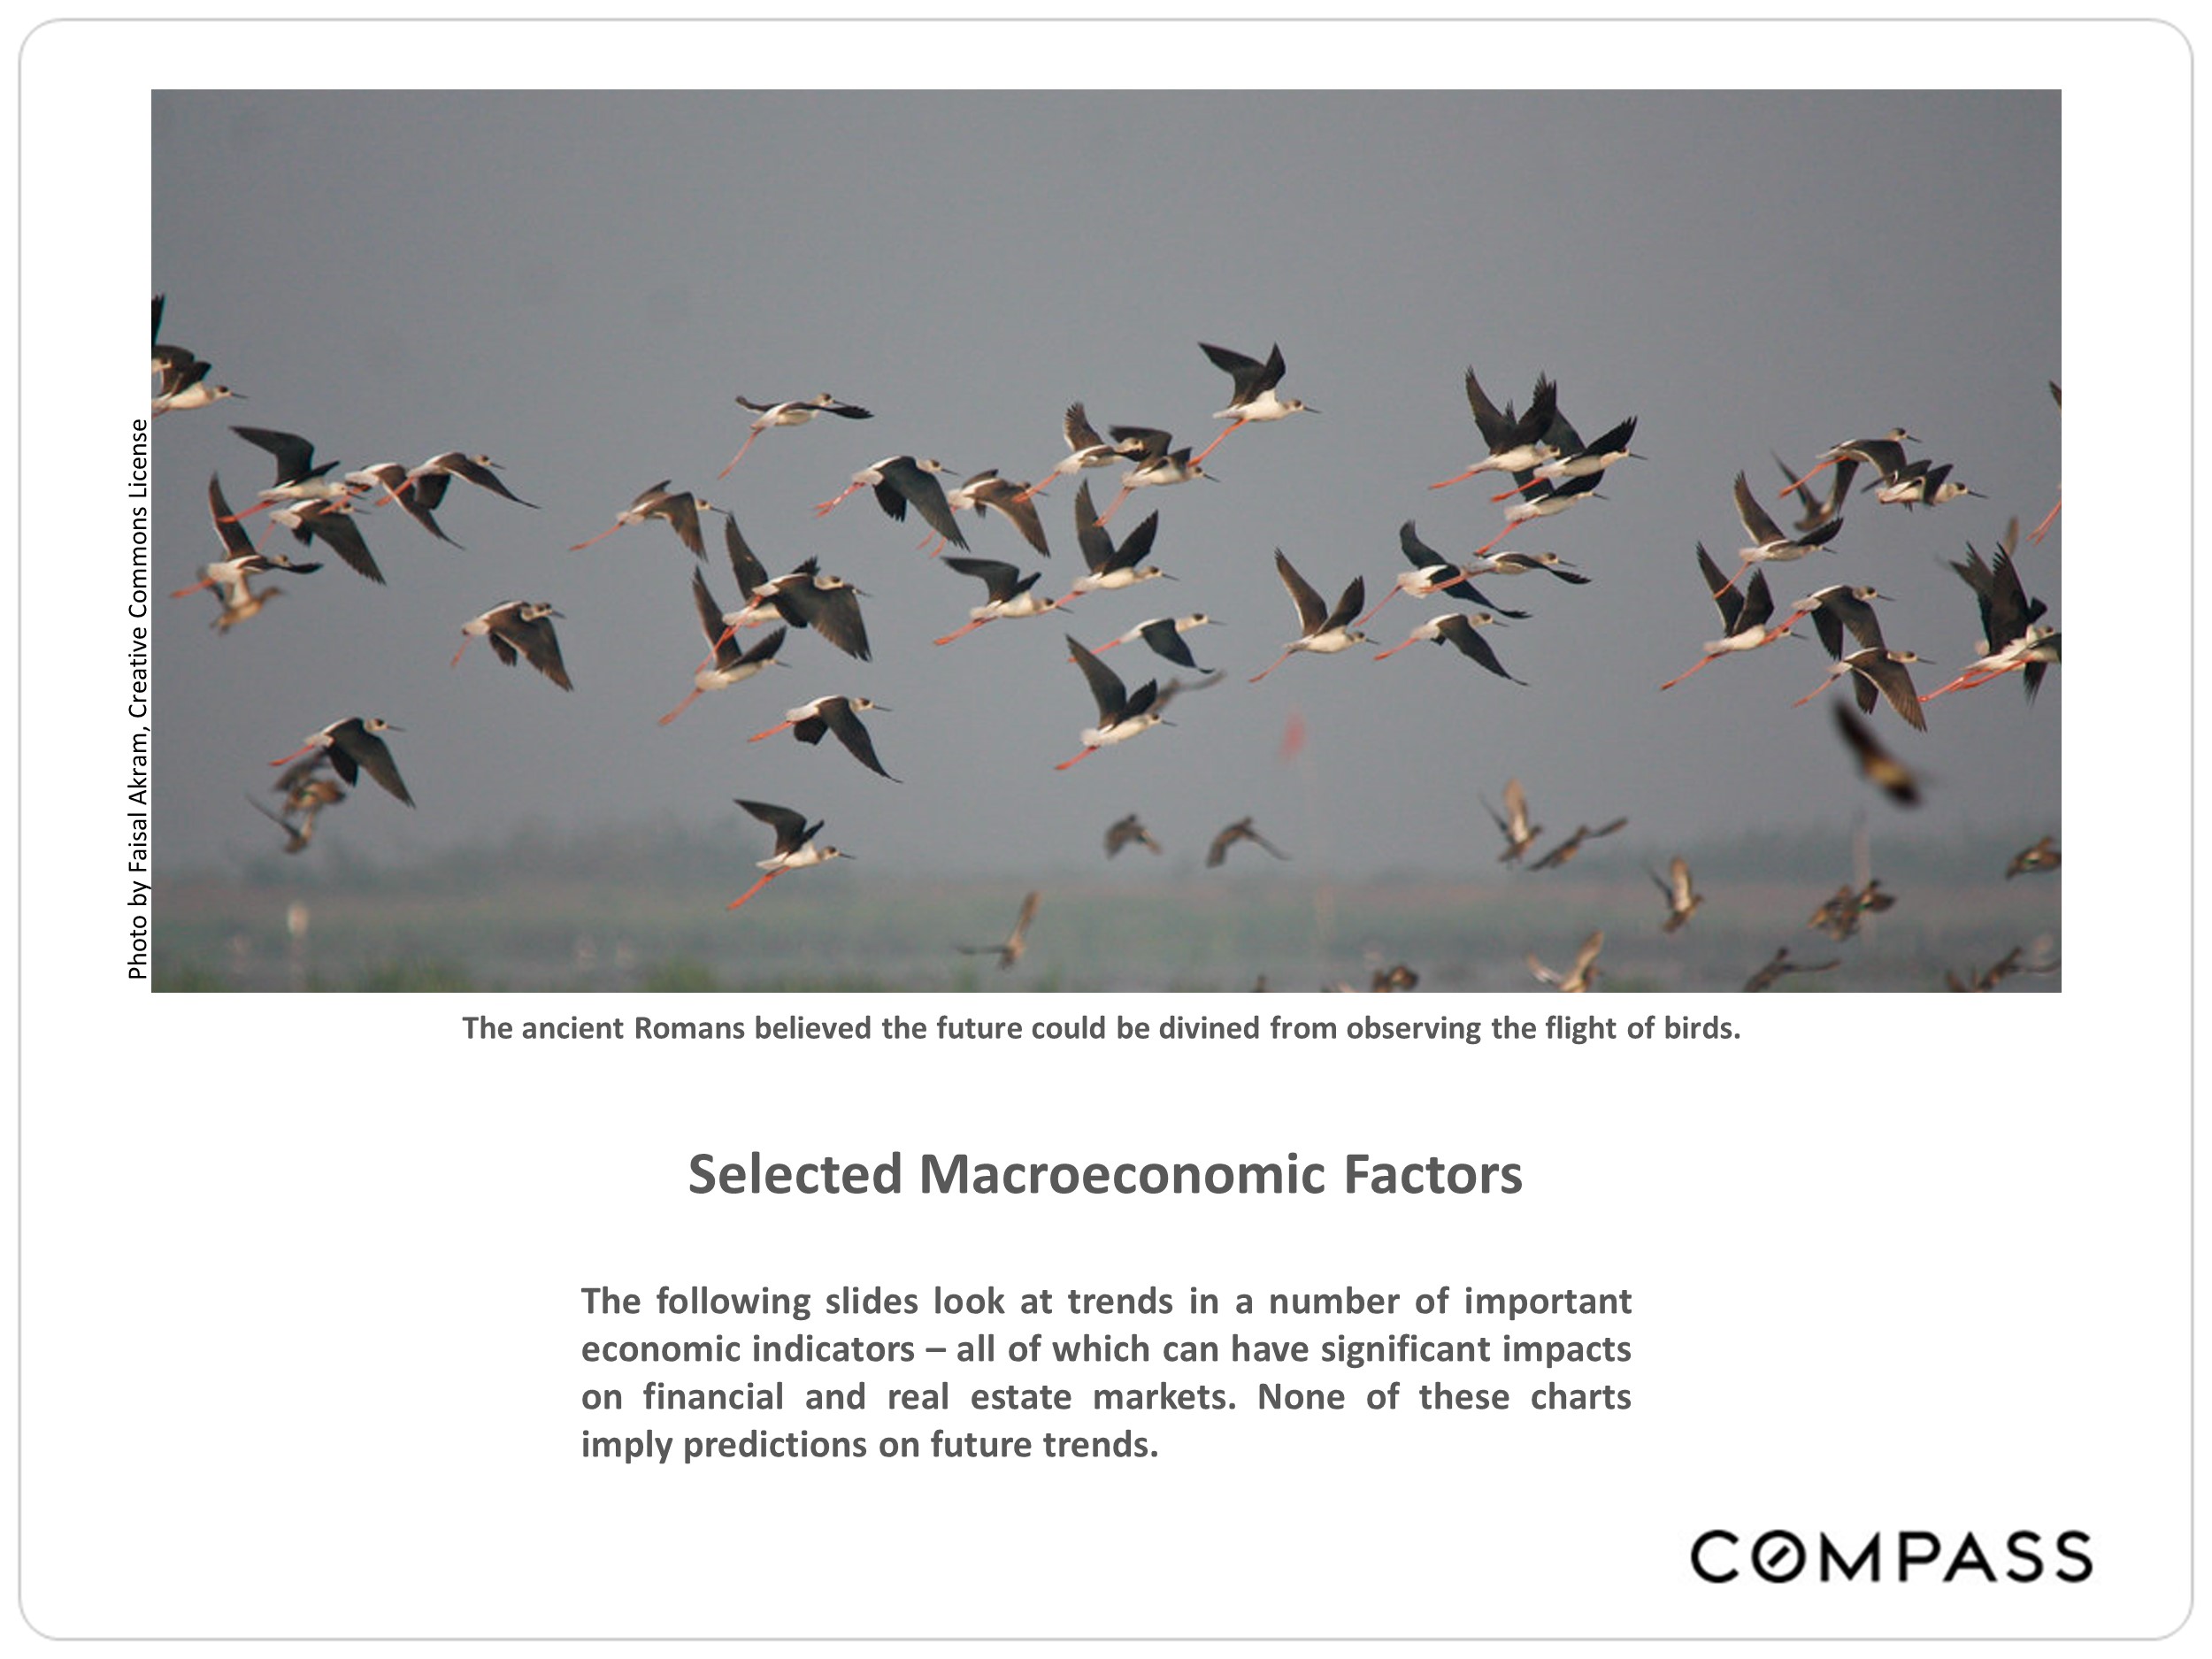 photo of birds flying with text introducing the macroeconomic factors presented in the following slides